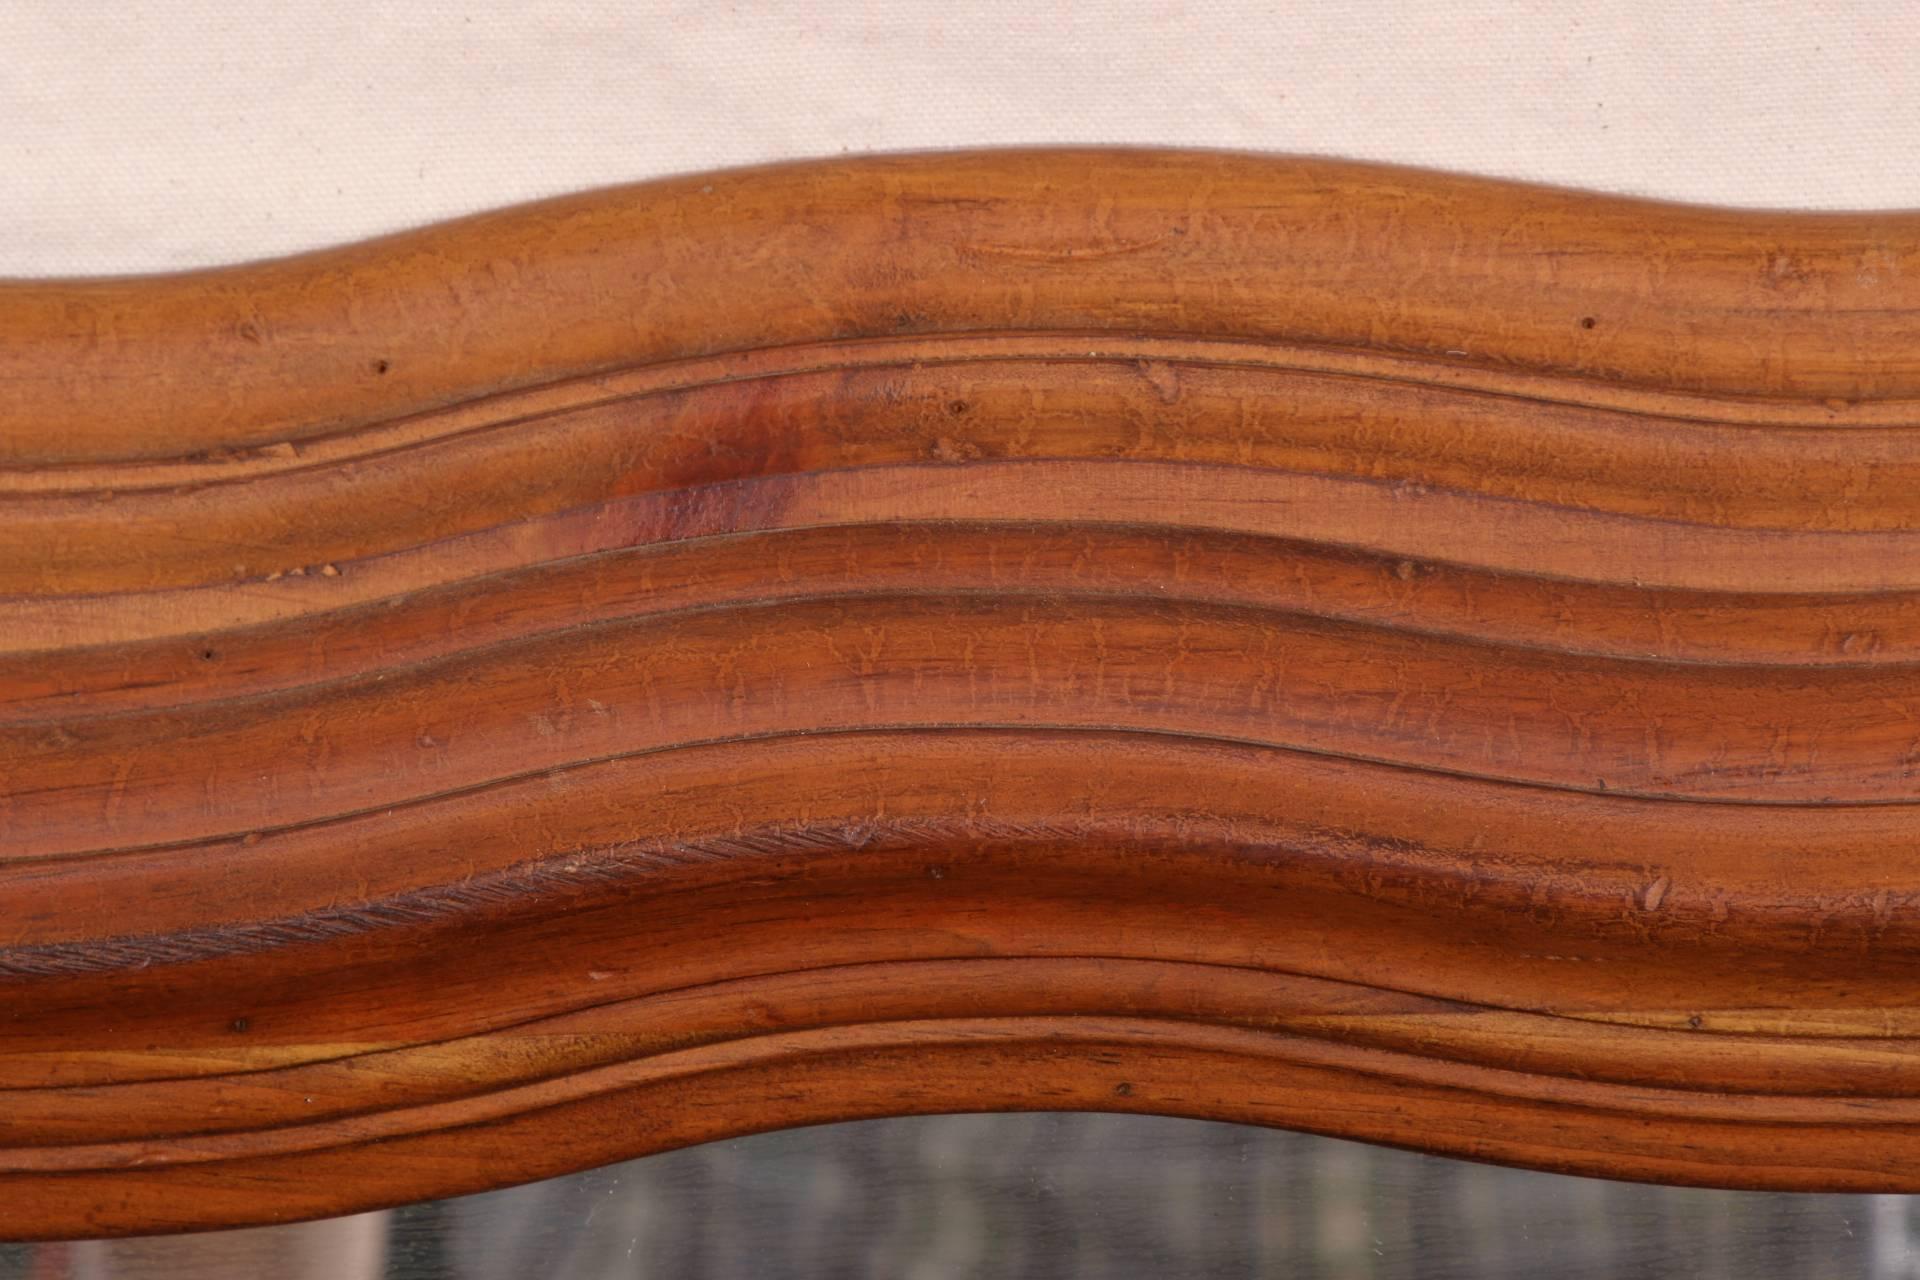 With carved, ribbed and wavy surrounds in a walnut finish. 
Condition: some stains to the wood, otherwise good.